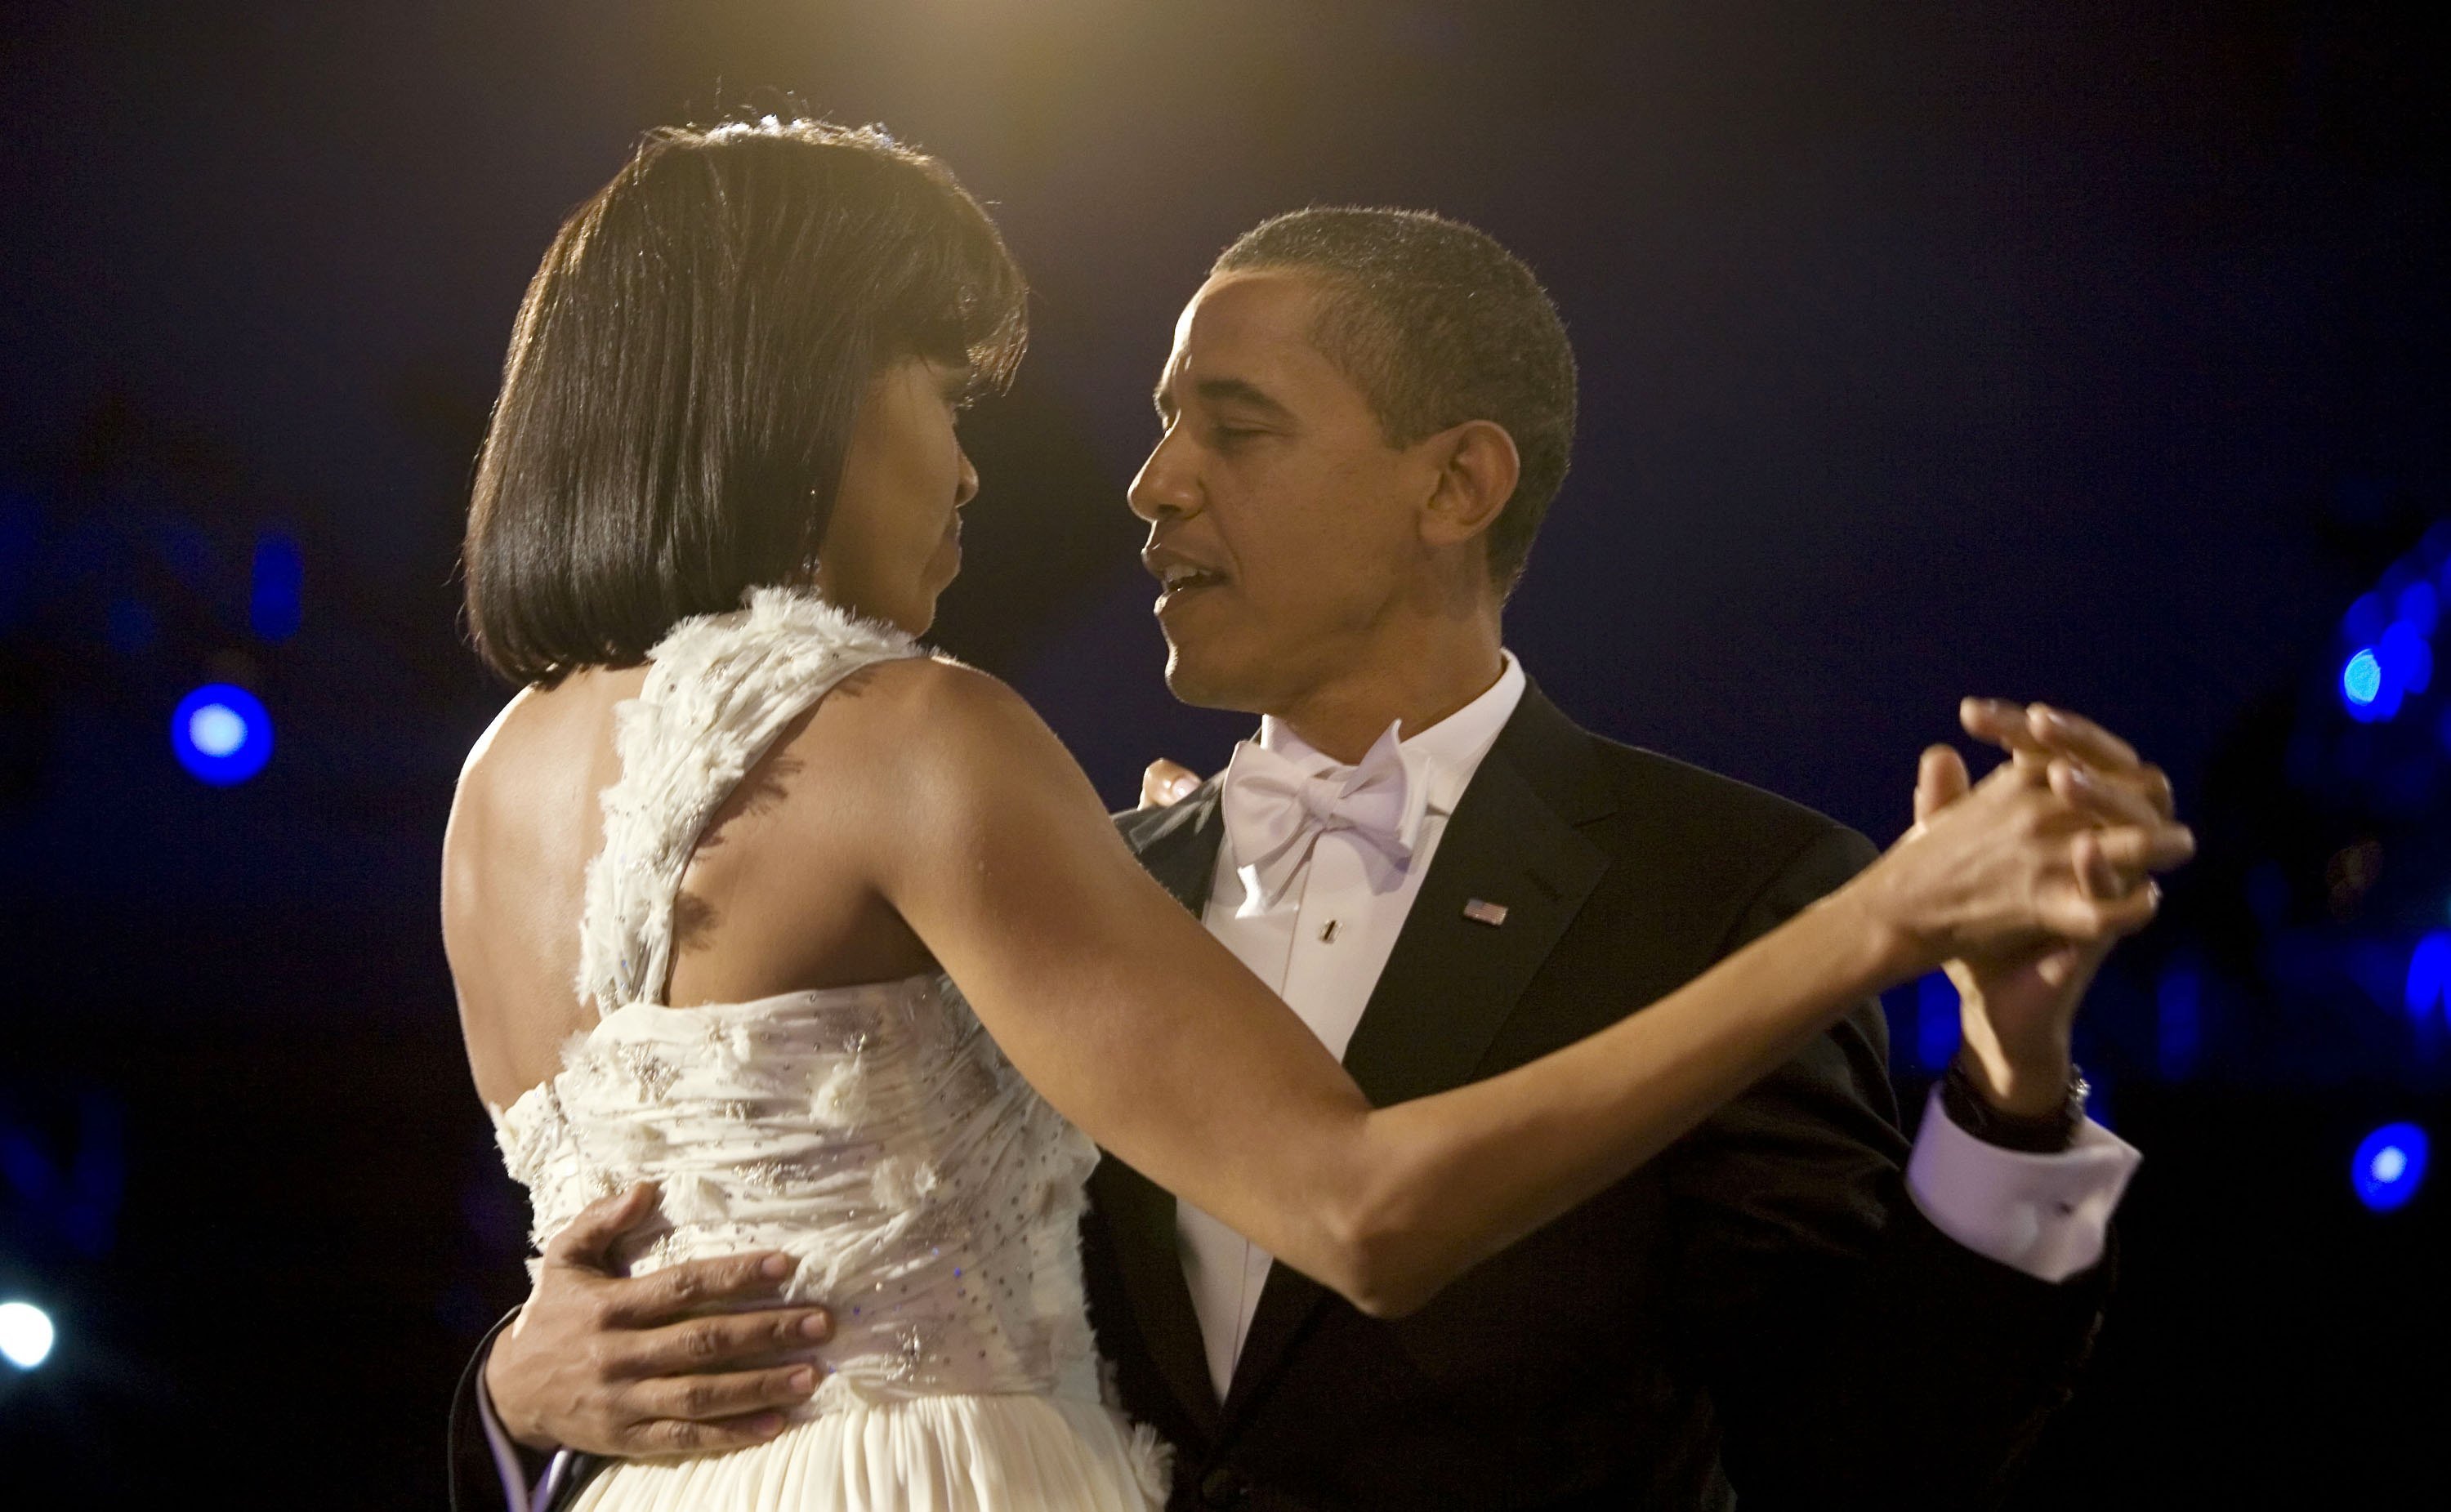 Michelle Obama & Barack Obama dancing at an inaugural gala on Jan. 20, 2009 in Washington, DC | Photo: Getty Images